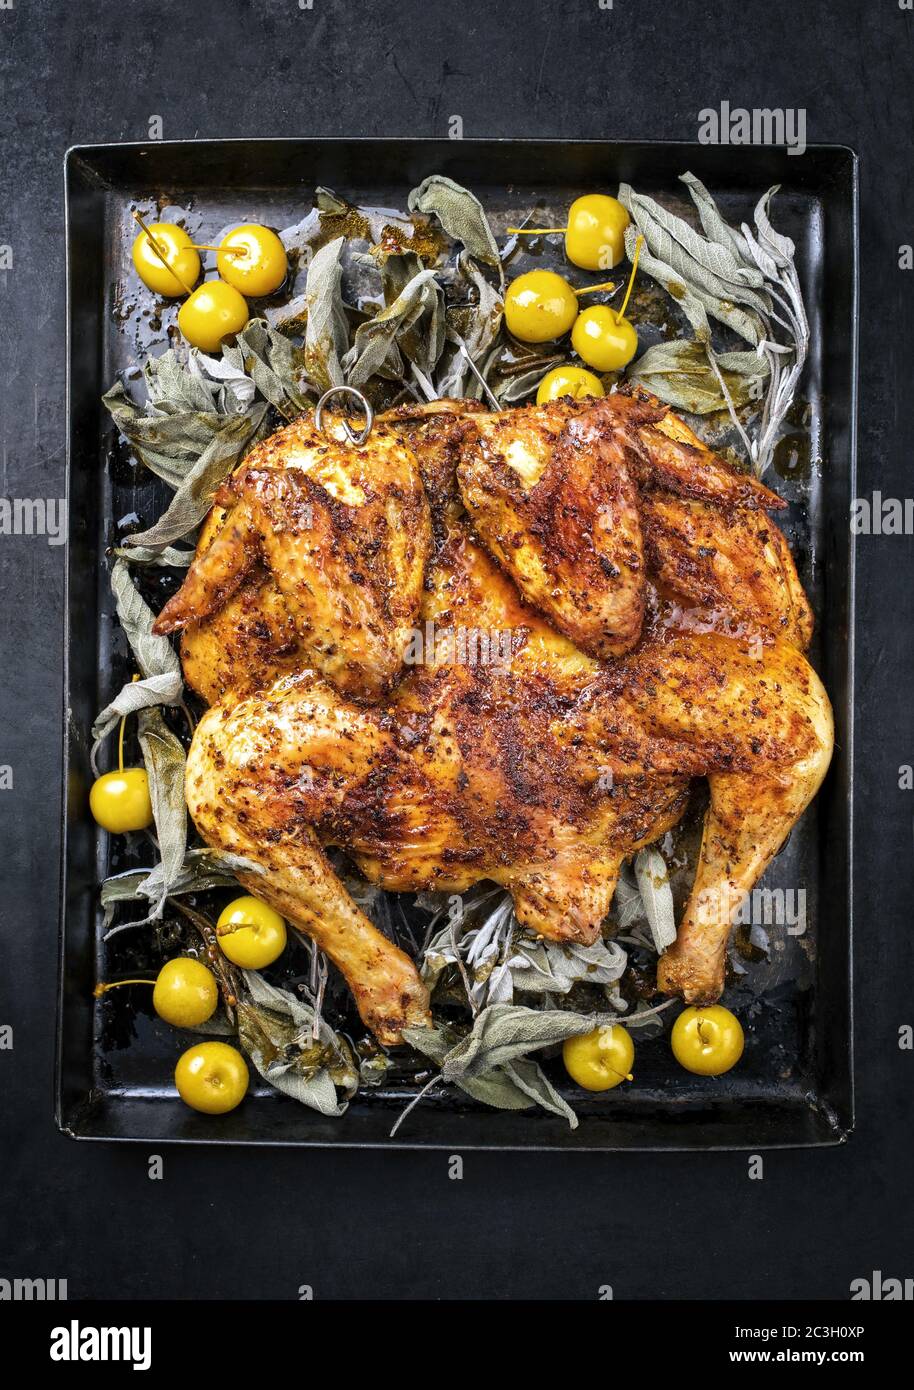 Barbecue spatchcocked chicken al mattone chili with mini apples and sage leaves as top view on an old metal tray Stock Photo